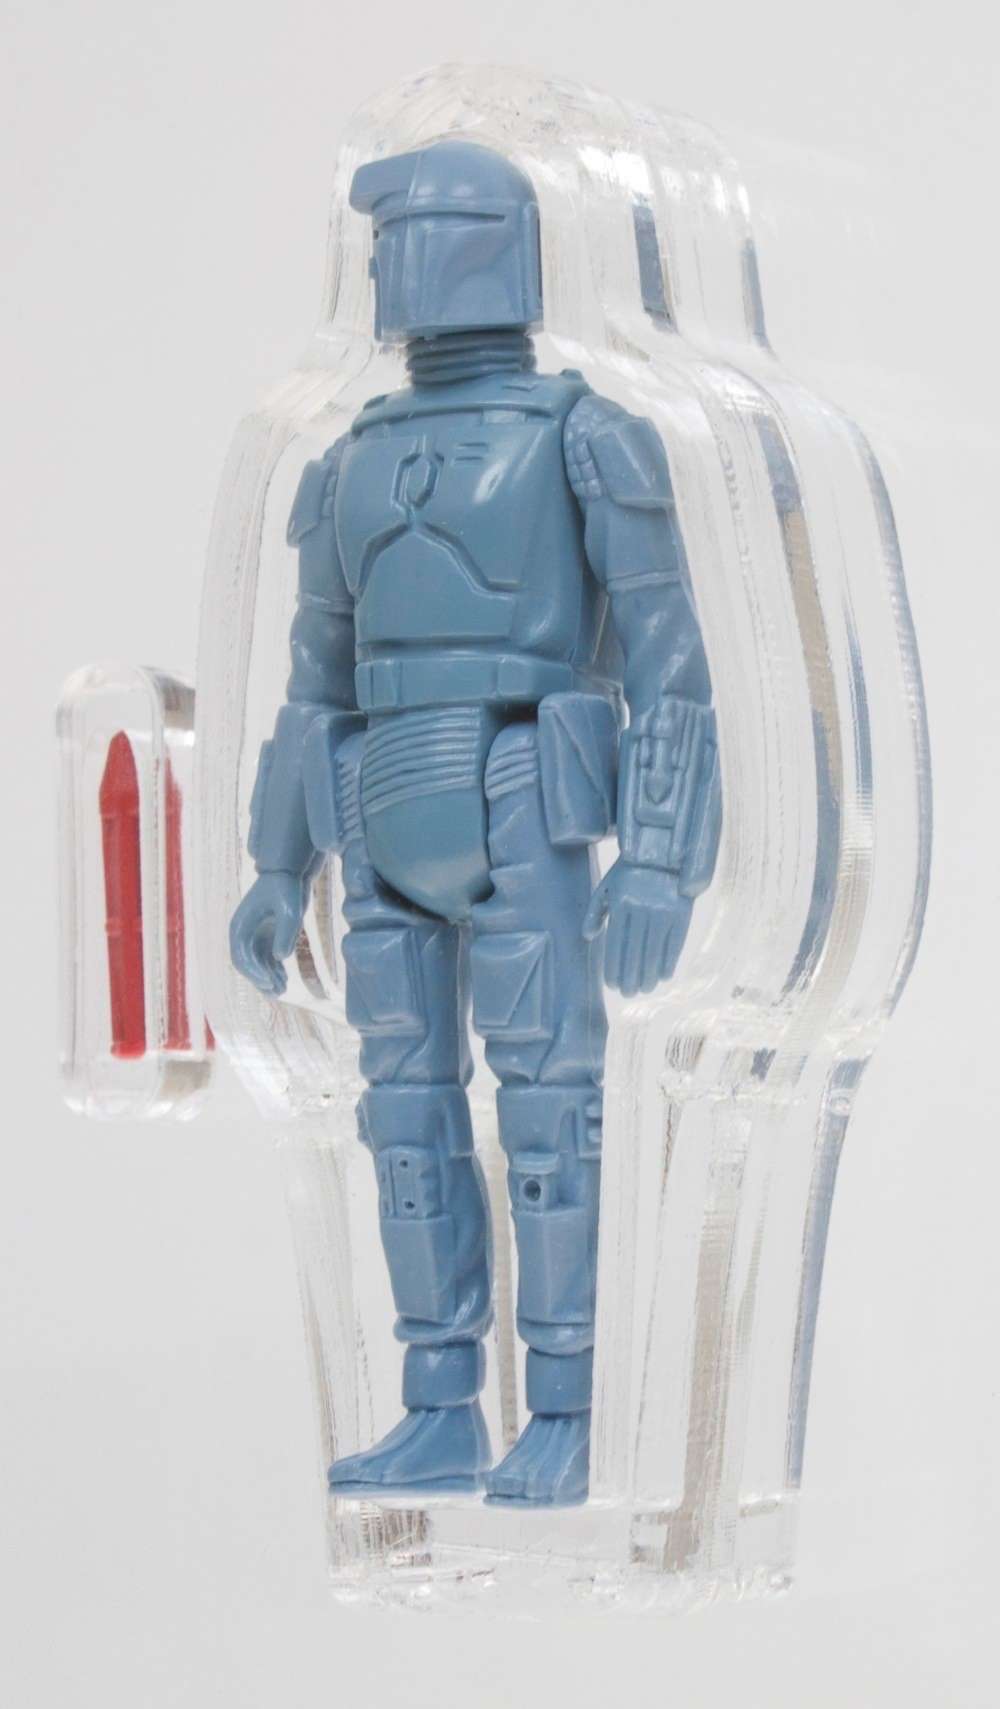 PHOTO: A rare, unpainted prototype of a rocket-firing Boba Fett action figure is for sale for an asking price of $225,000.  